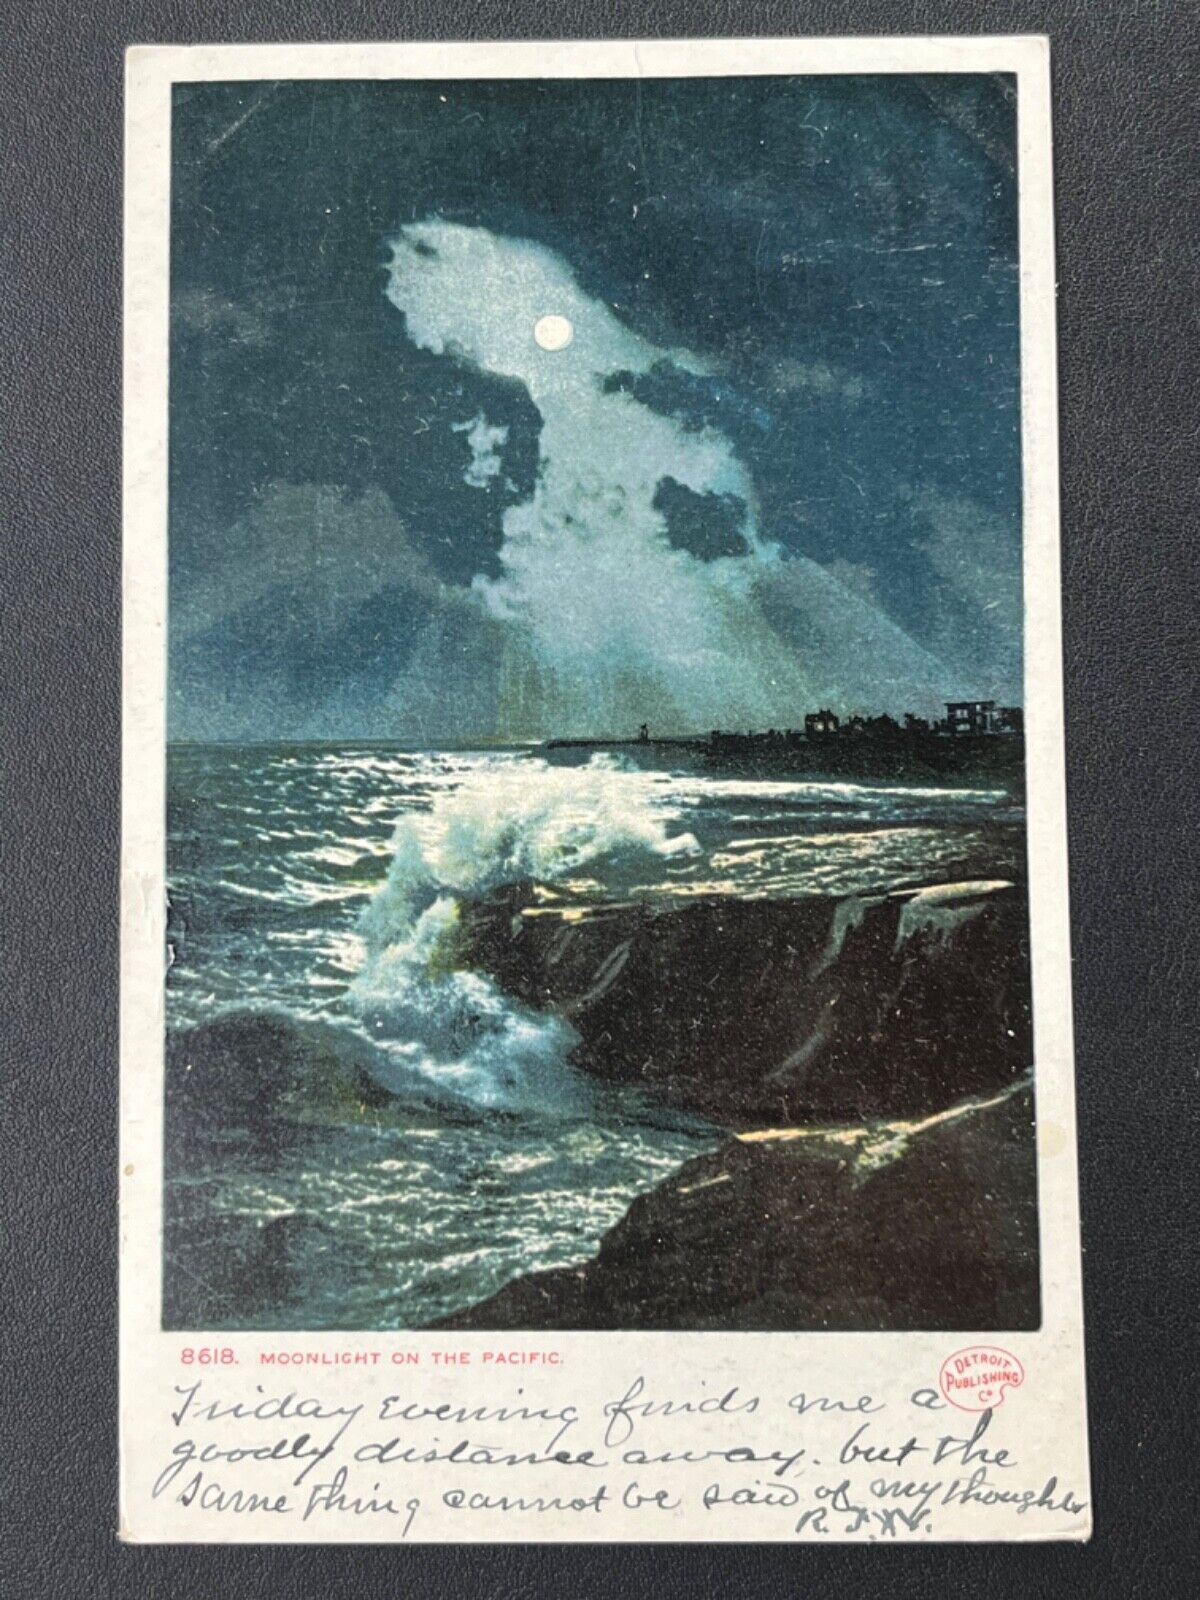 1906 MOONLIGHT ON THE PACIFIC DETROIT PUBLISHING POSTCARD